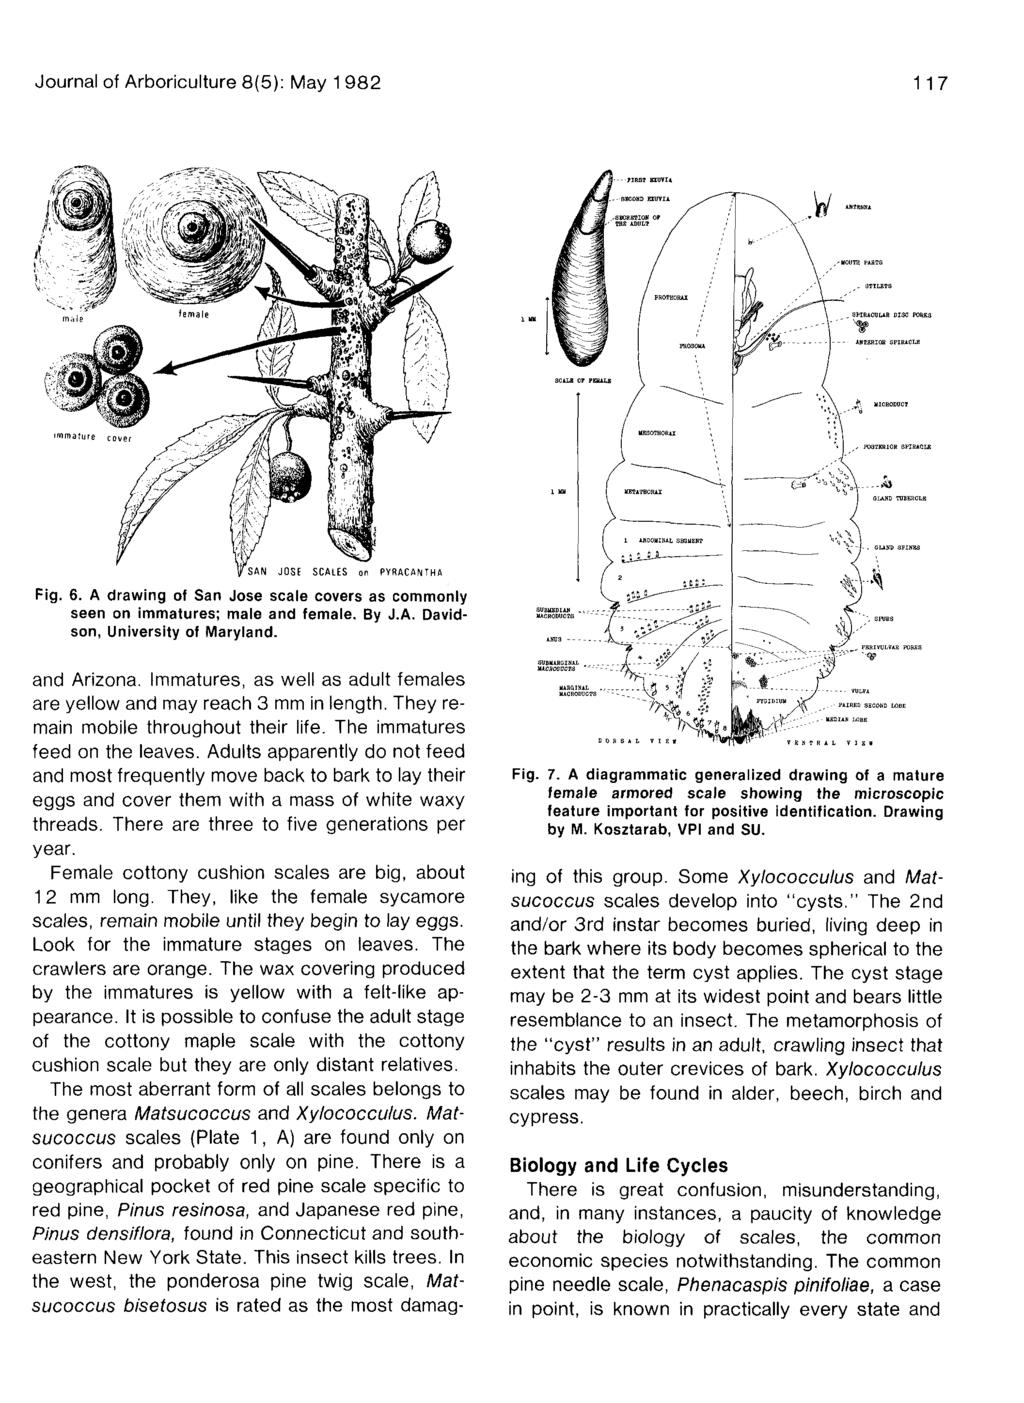 Journal of Arboriculture 8(5): May 1 982 117 Fig. 6. A drawing of San Jose scale covers as commonly seen on immatures; male and female. By J.A. Davidson, University of Maryland. and Arizona.